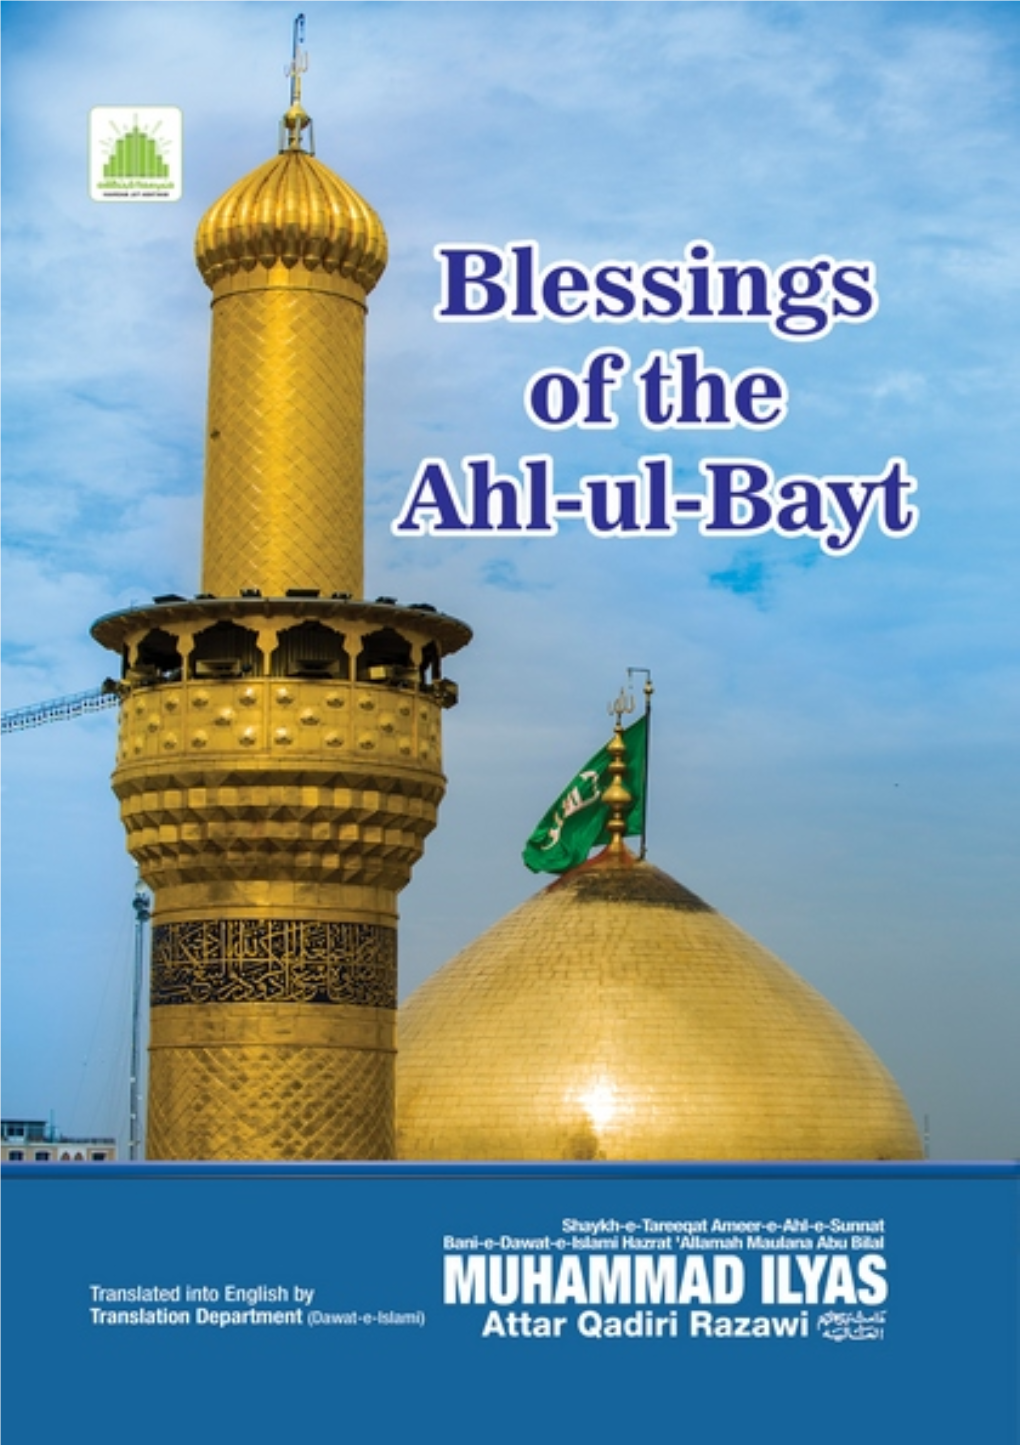 Blessings of the Ahl-Ul-Bayt